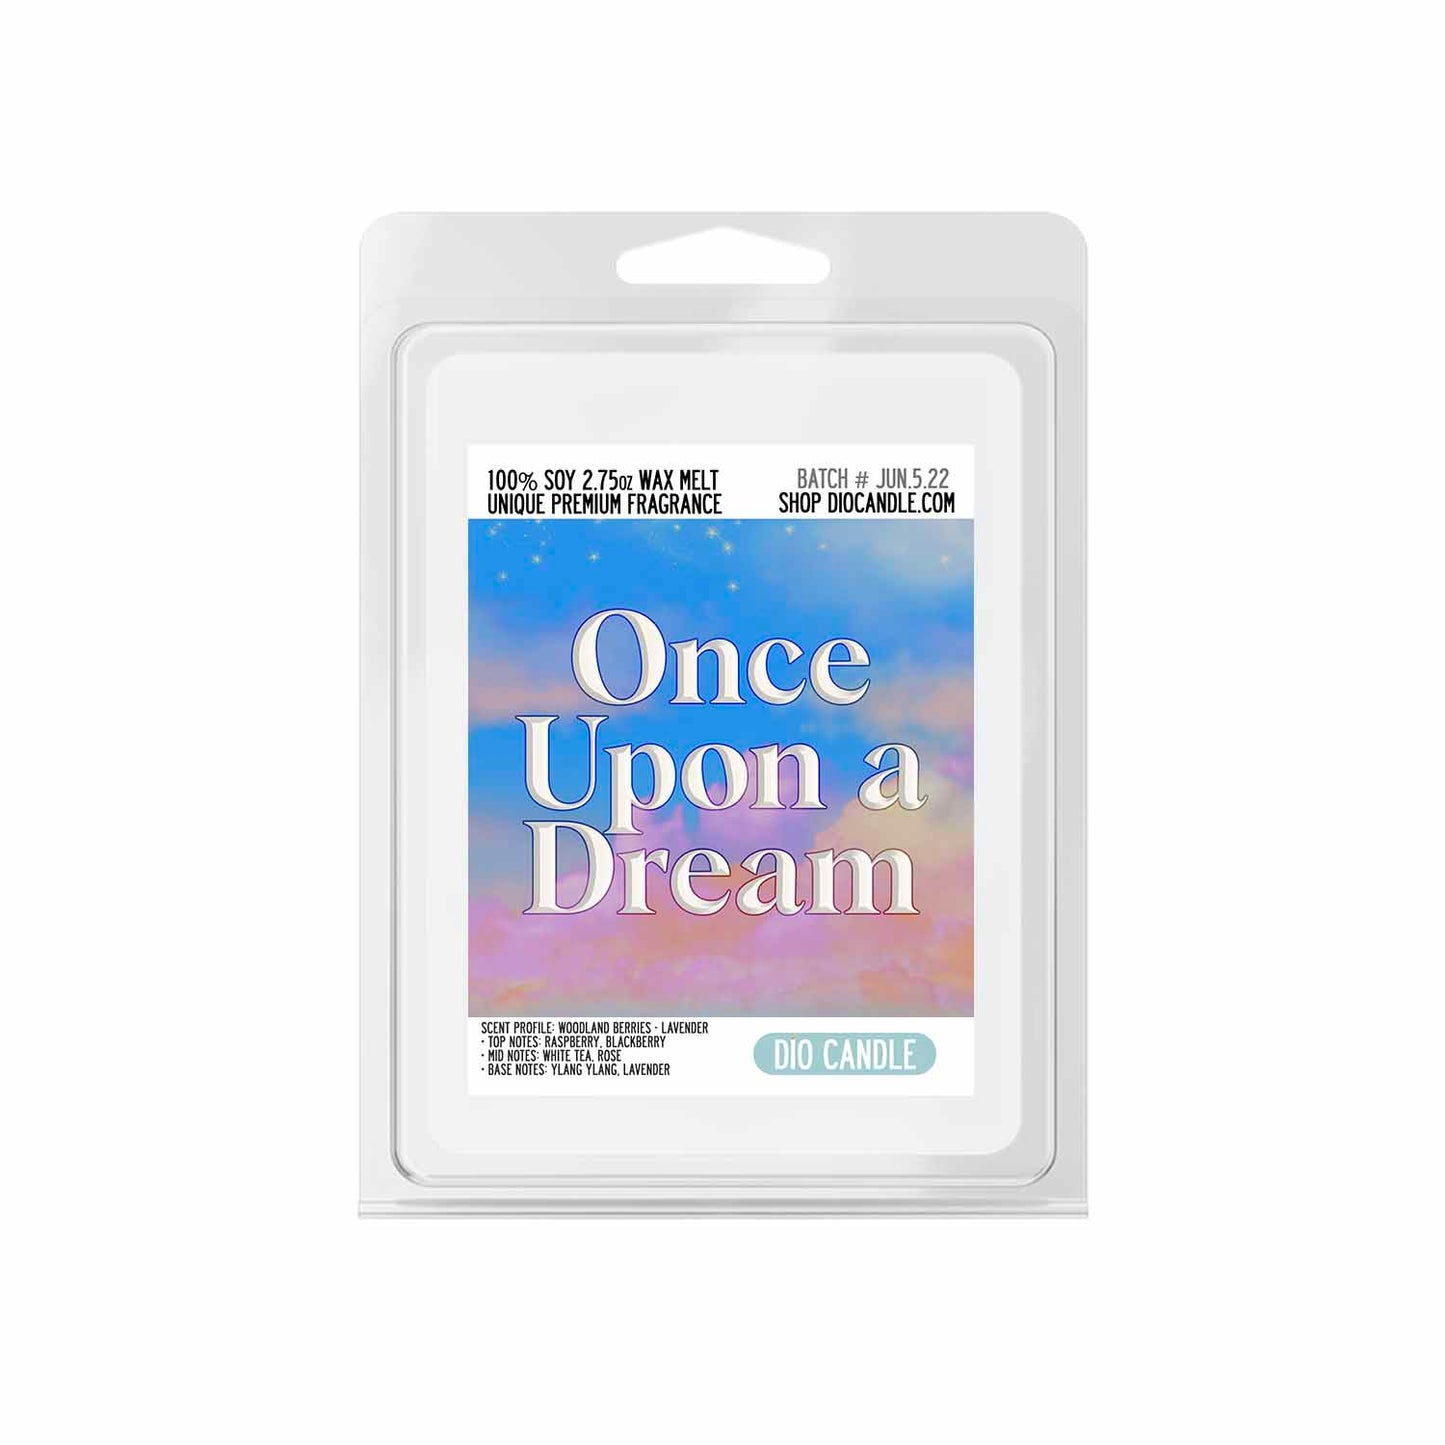 Once Upon a Dream Candle